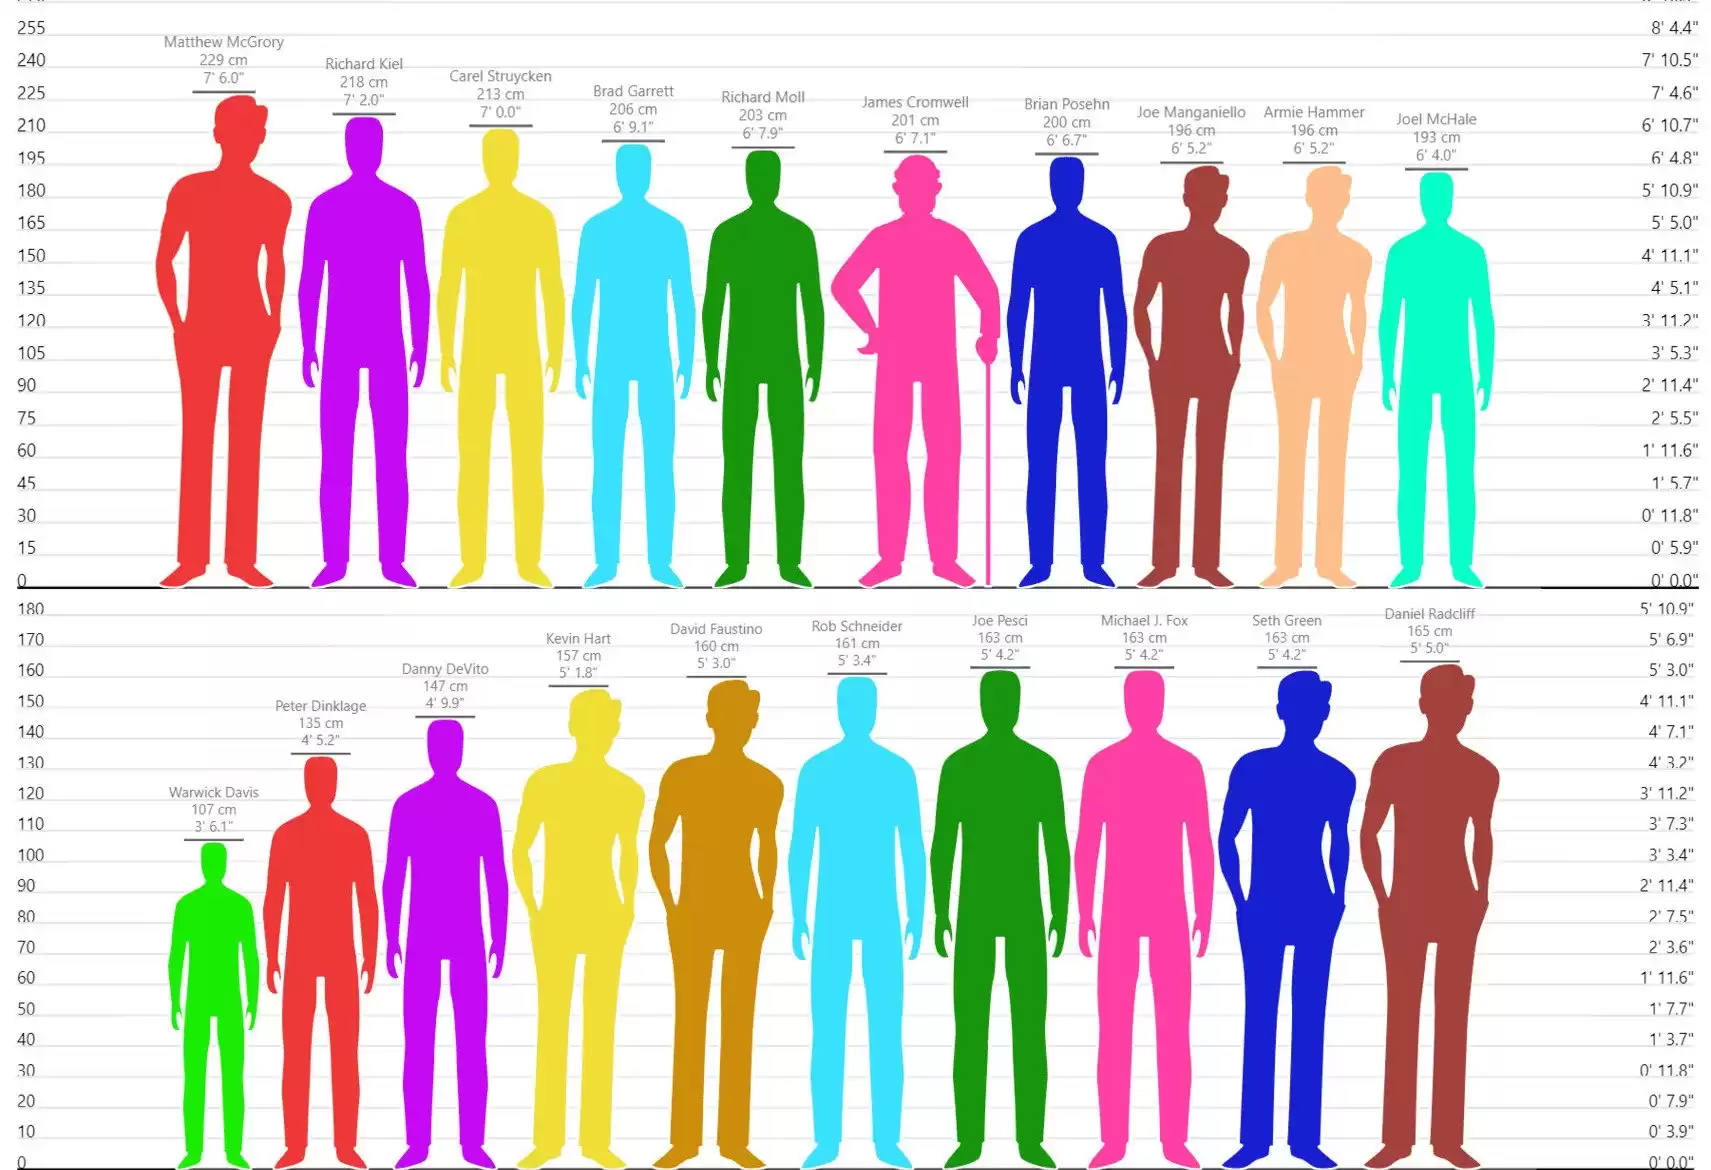 Hollywood’s Height Extremes – A Height Comparison